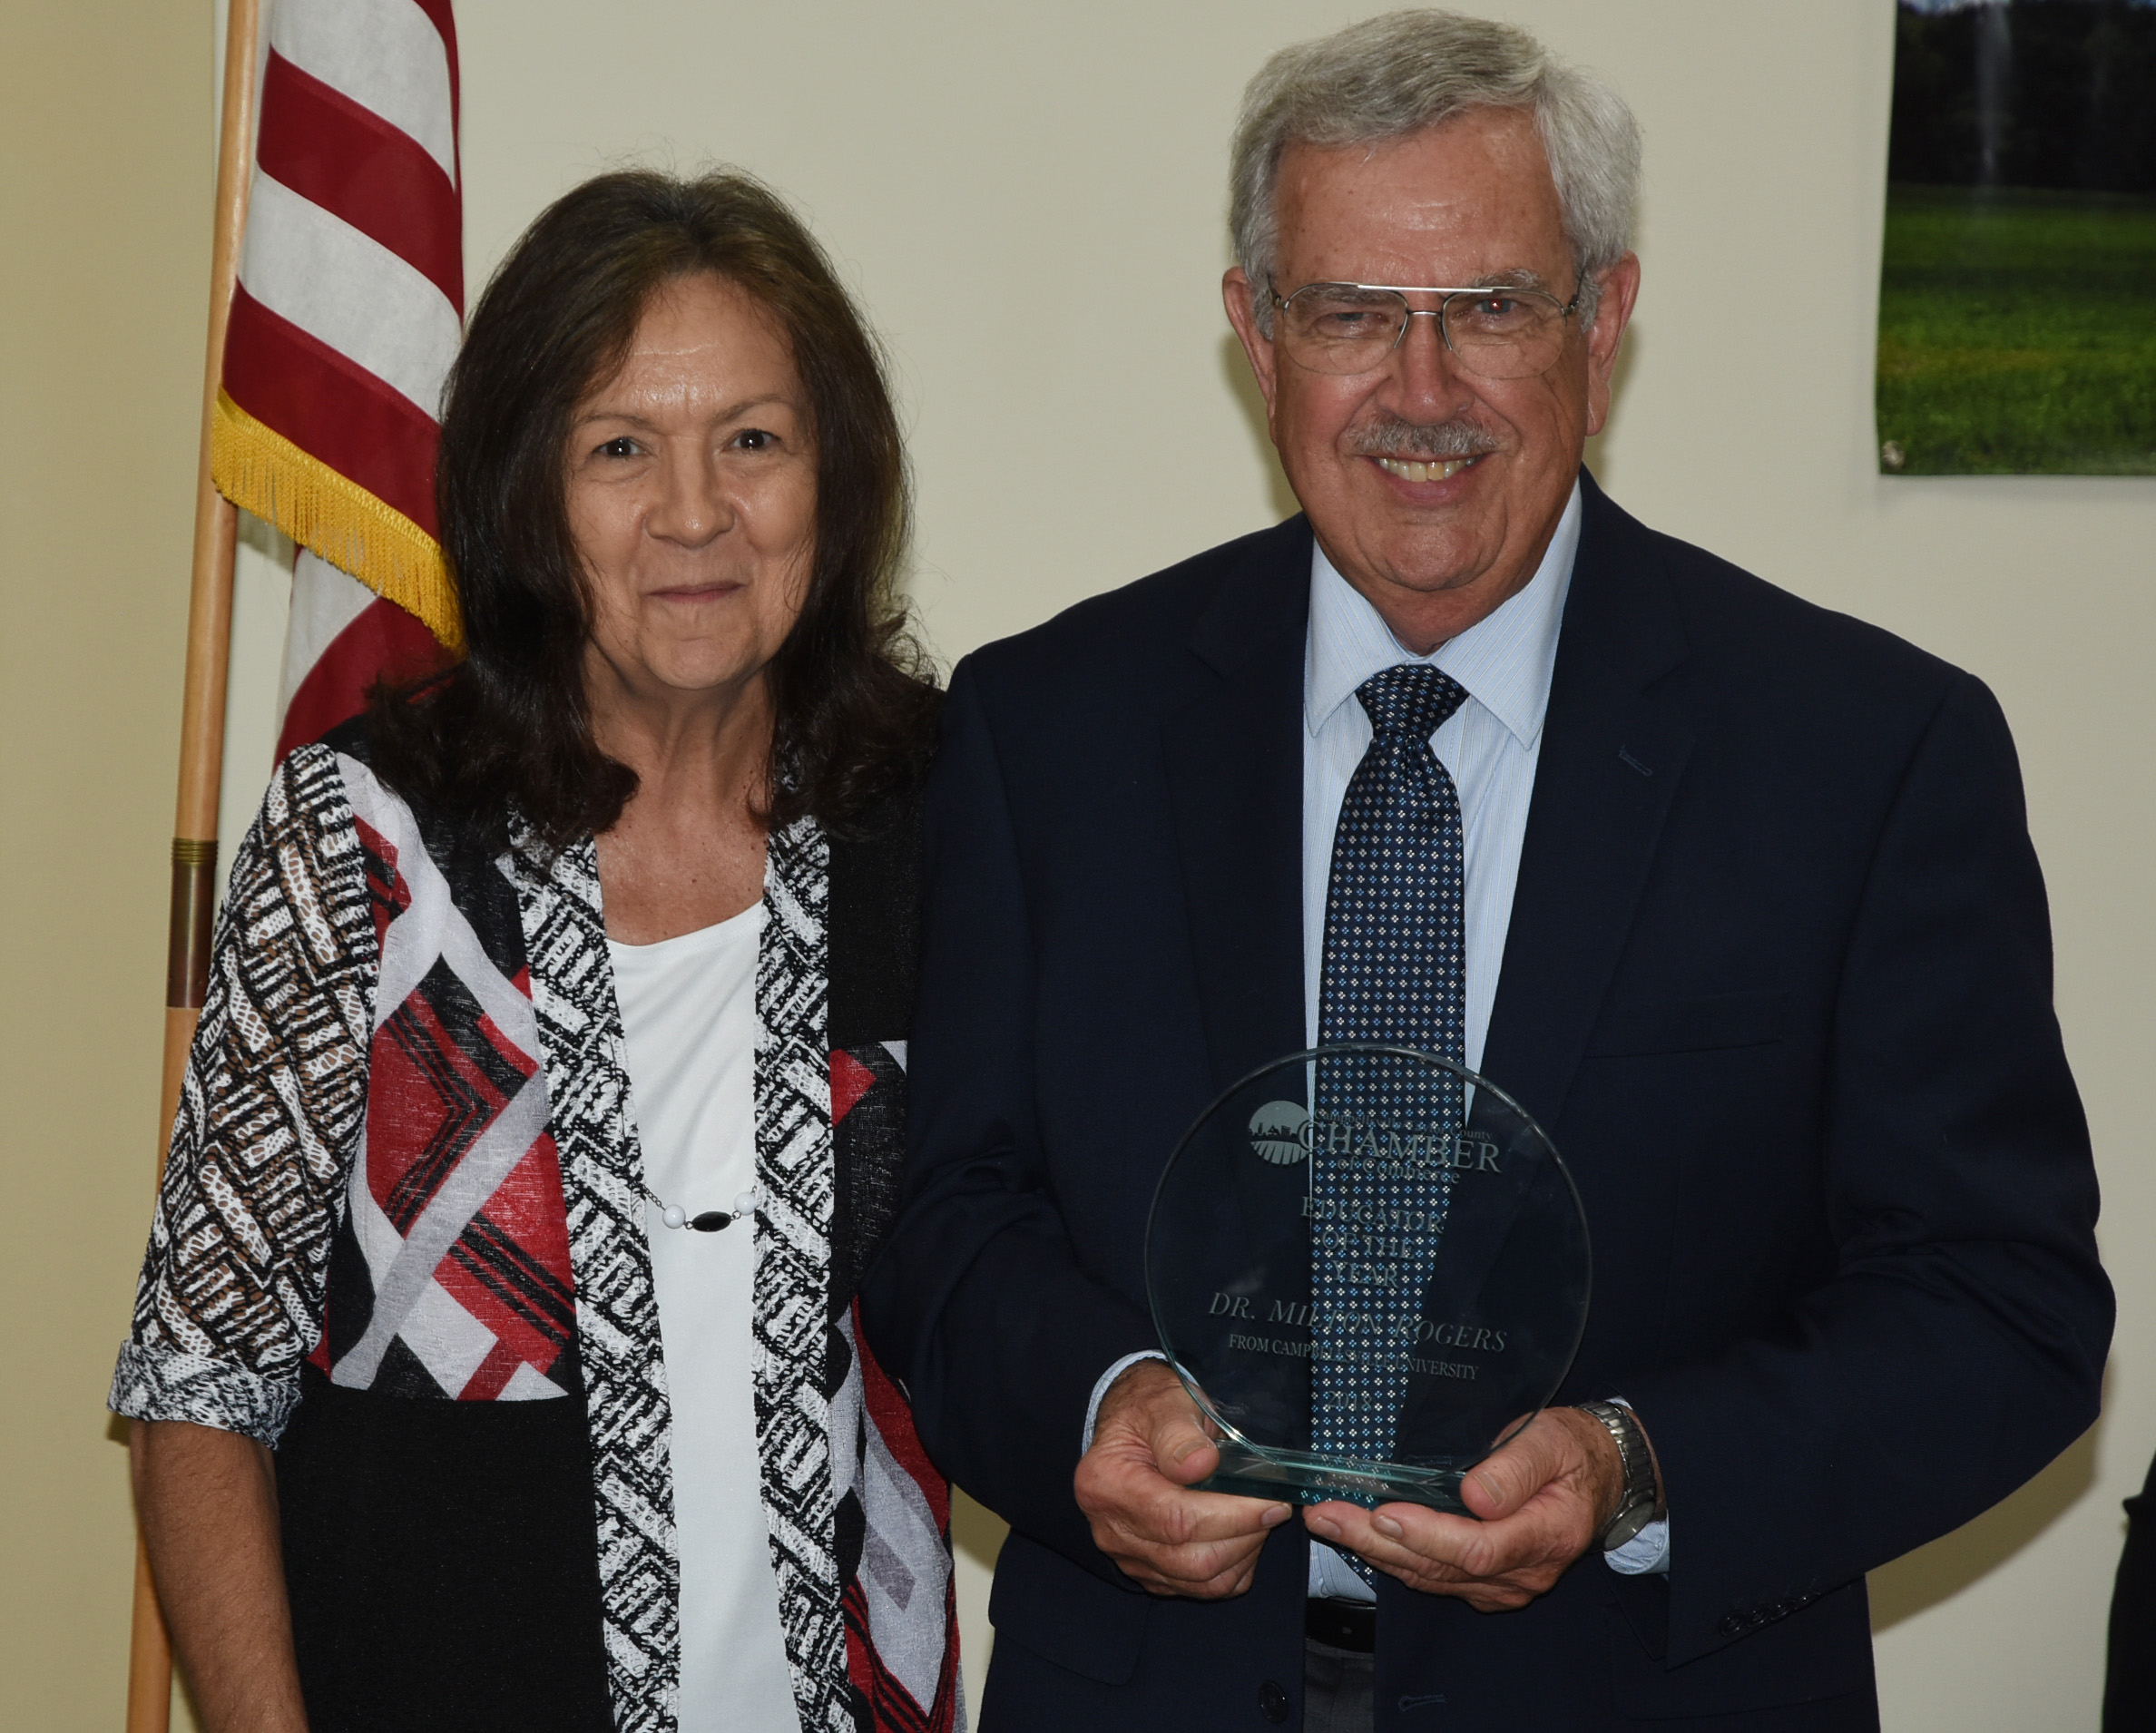 Dr. Milton Rogers, right, receives the Campbellsville-Taylor County Chamber of Commerce Educator of the Year Award from Dr. Pat Cowherd, president of the chamber who is dean of the School of Business, Economics and Technology at CU. (CU Photo by Joan C. McKinney)